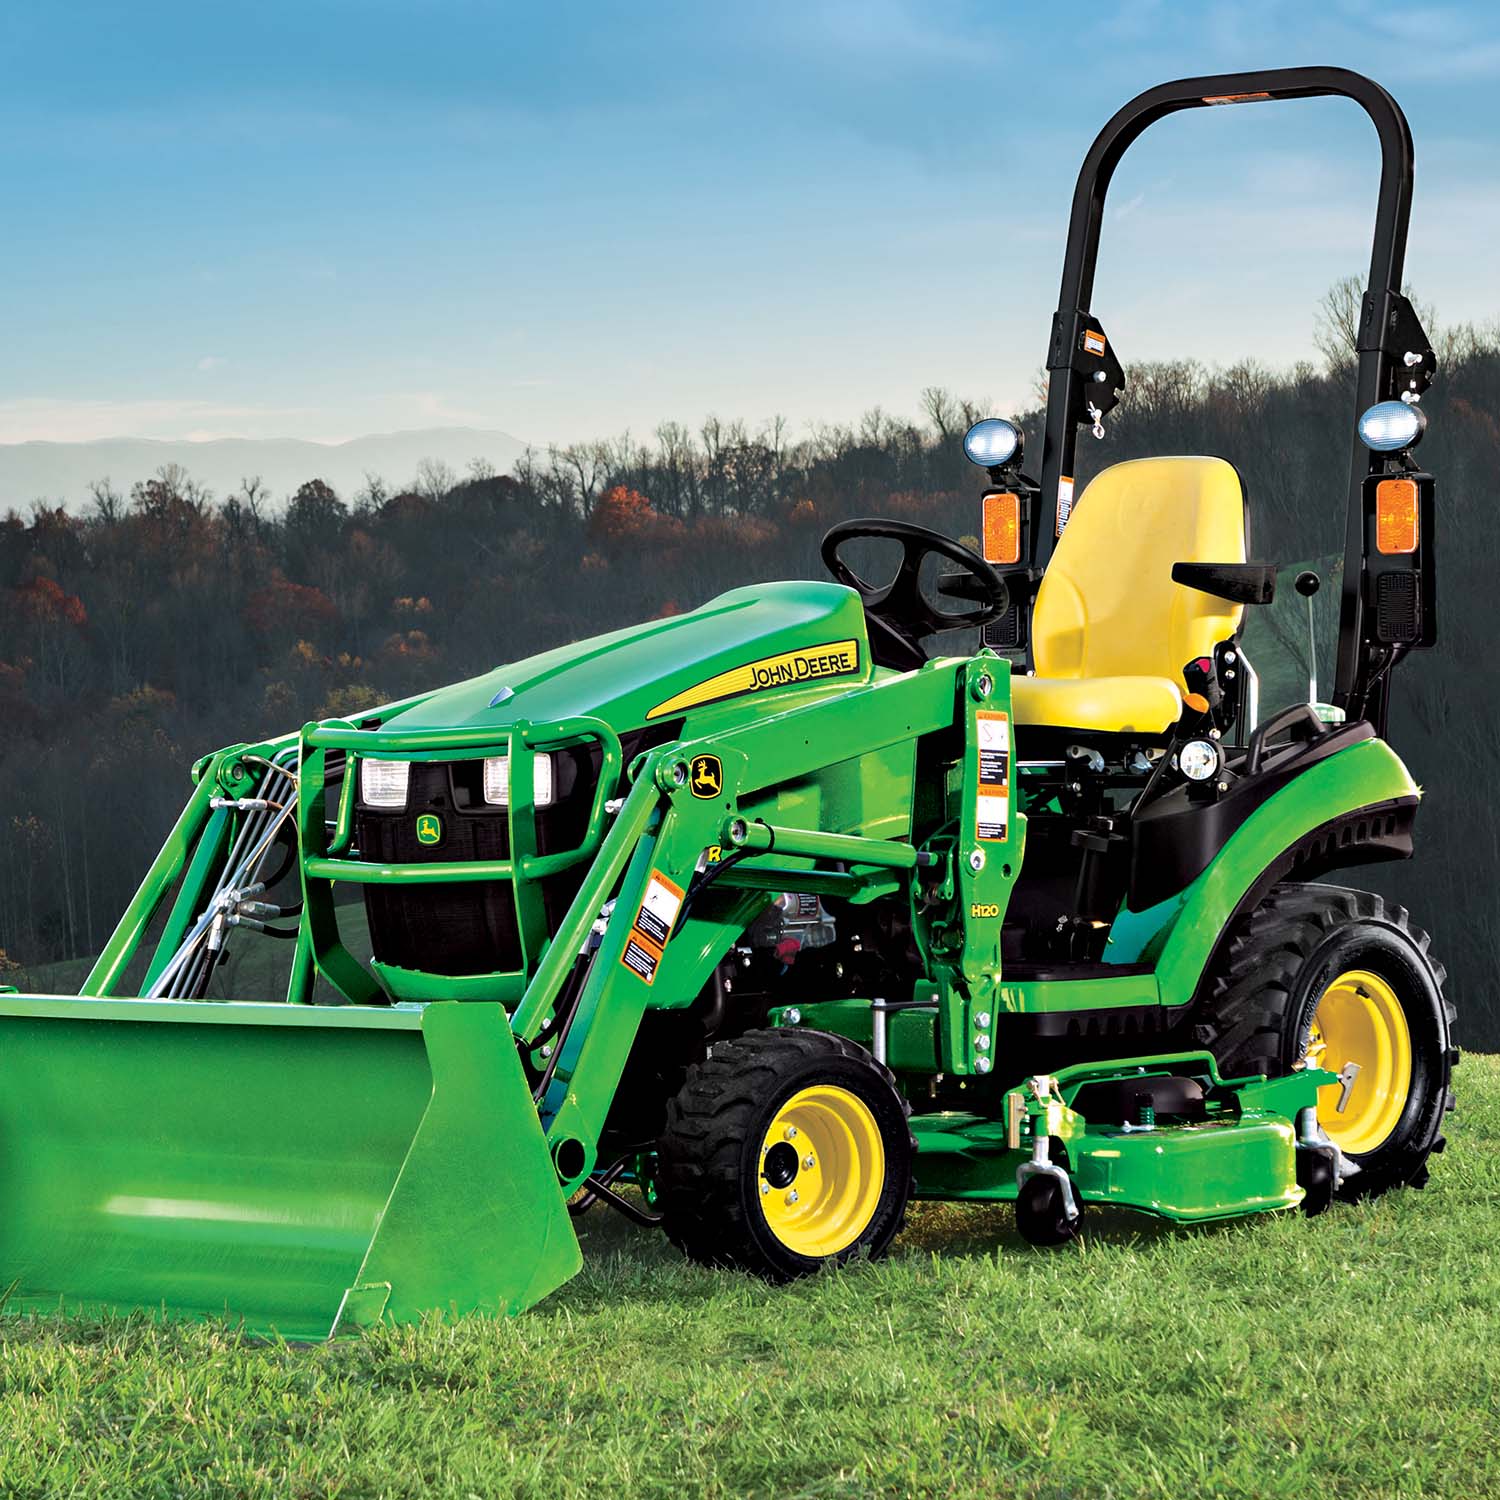 Homeowner Package - 1025R Compact Tractor Package